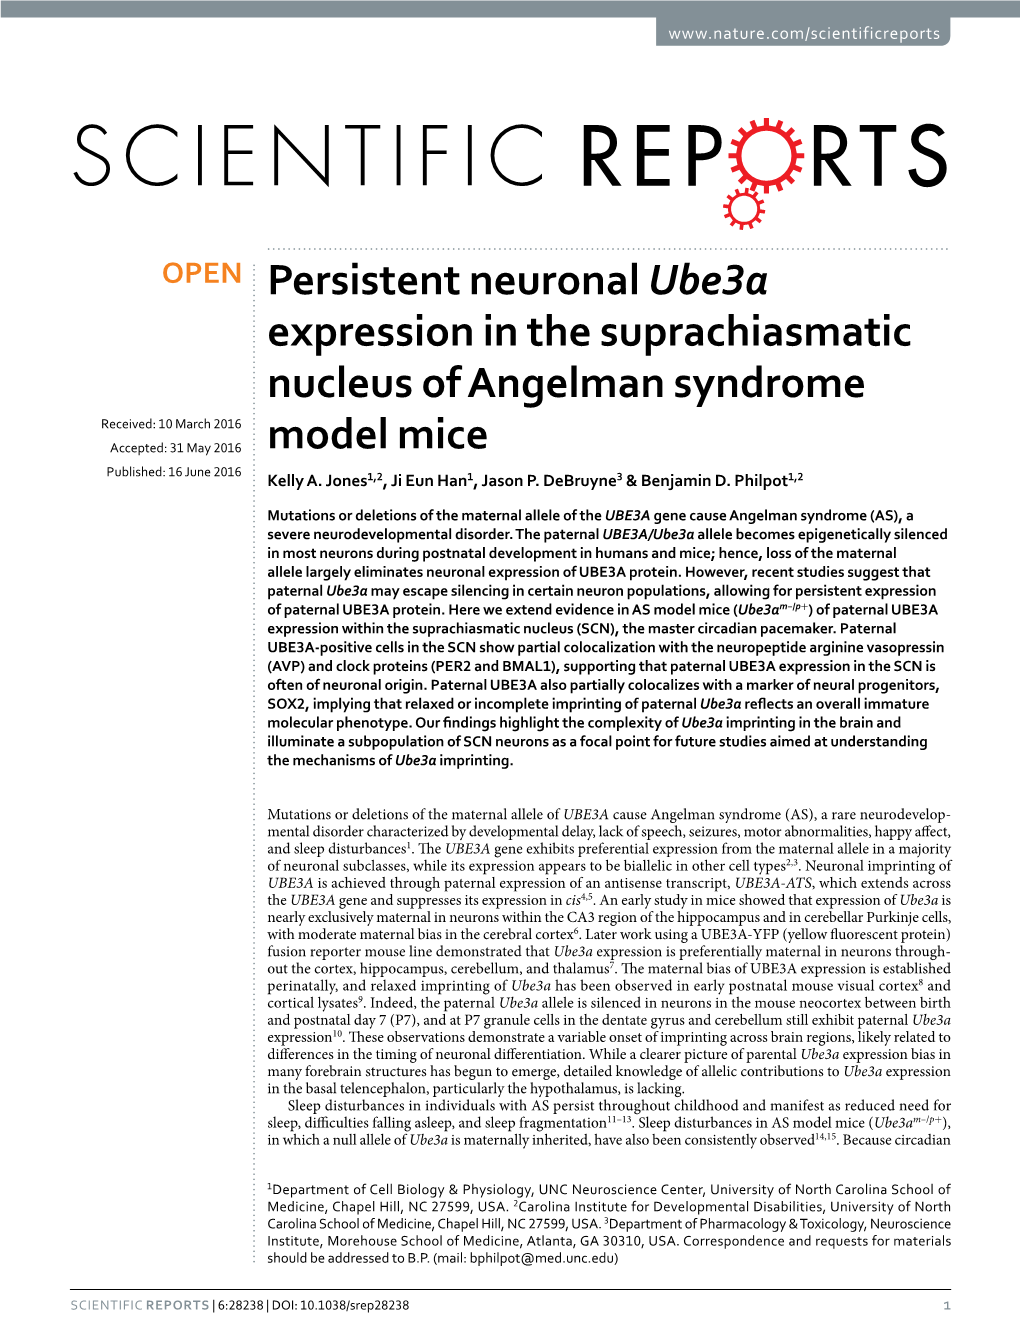 Persistent Neuronal Ube3a Expression in the Suprachiasmatic Nucleus Of